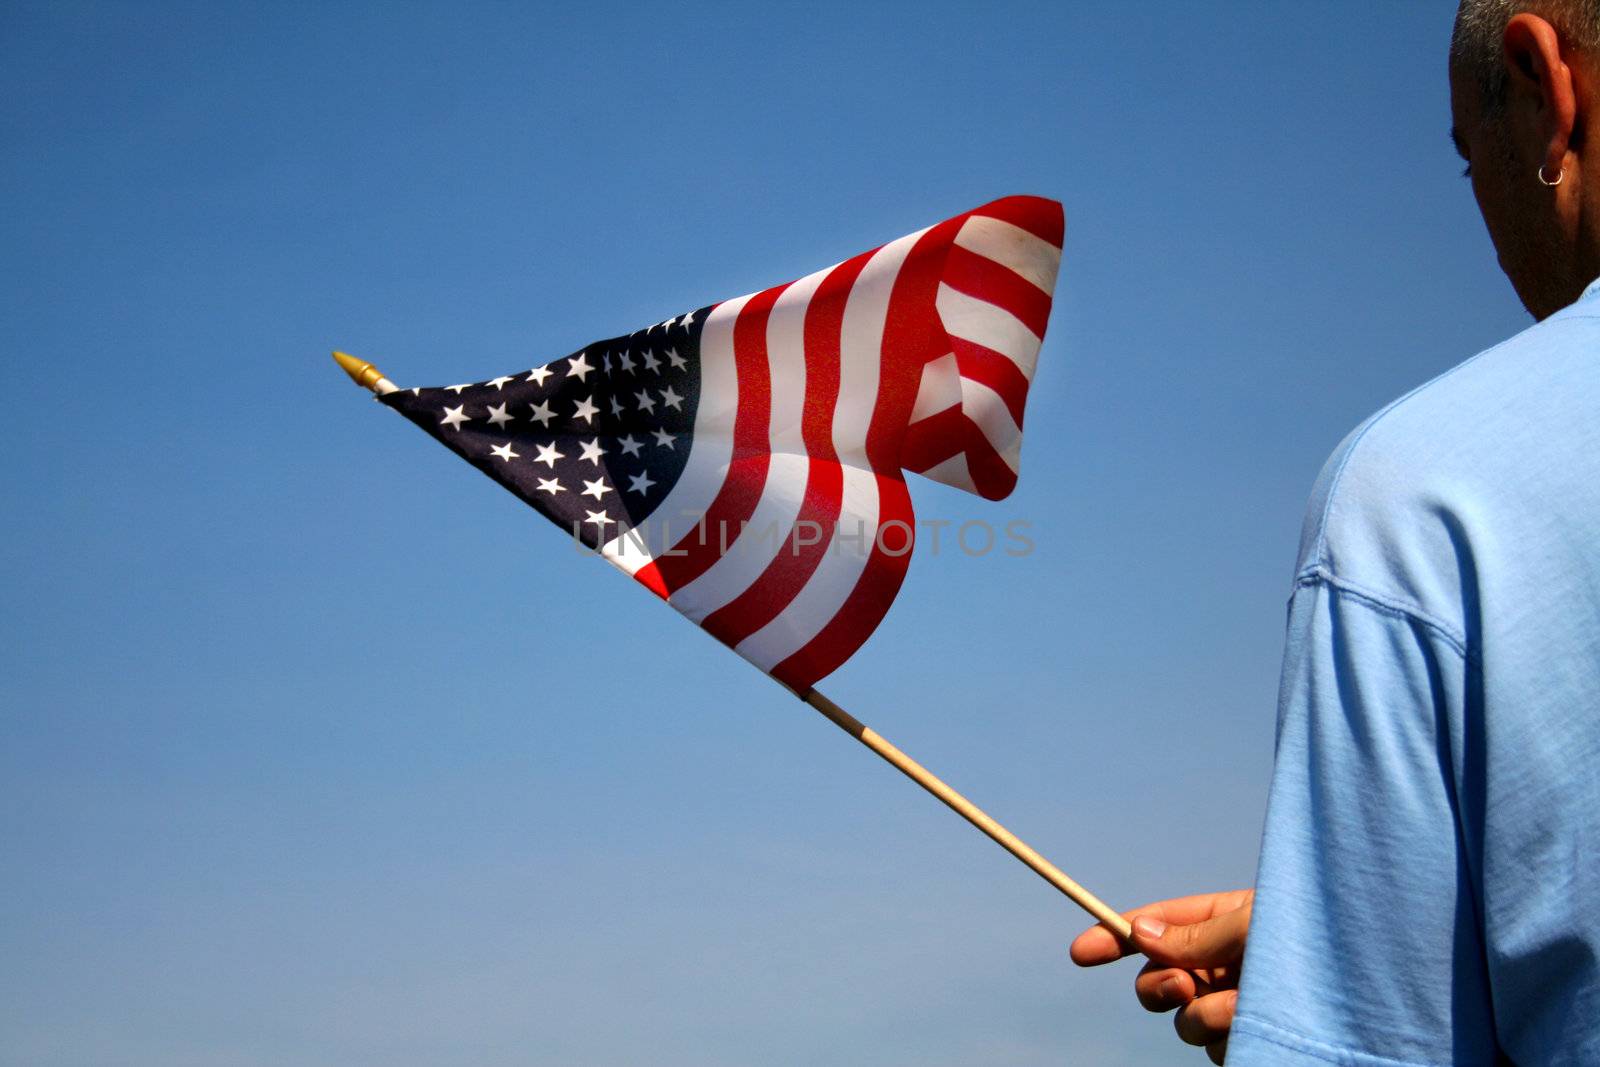 Person holding the American flag outside with a beautiful blue sky as the background.